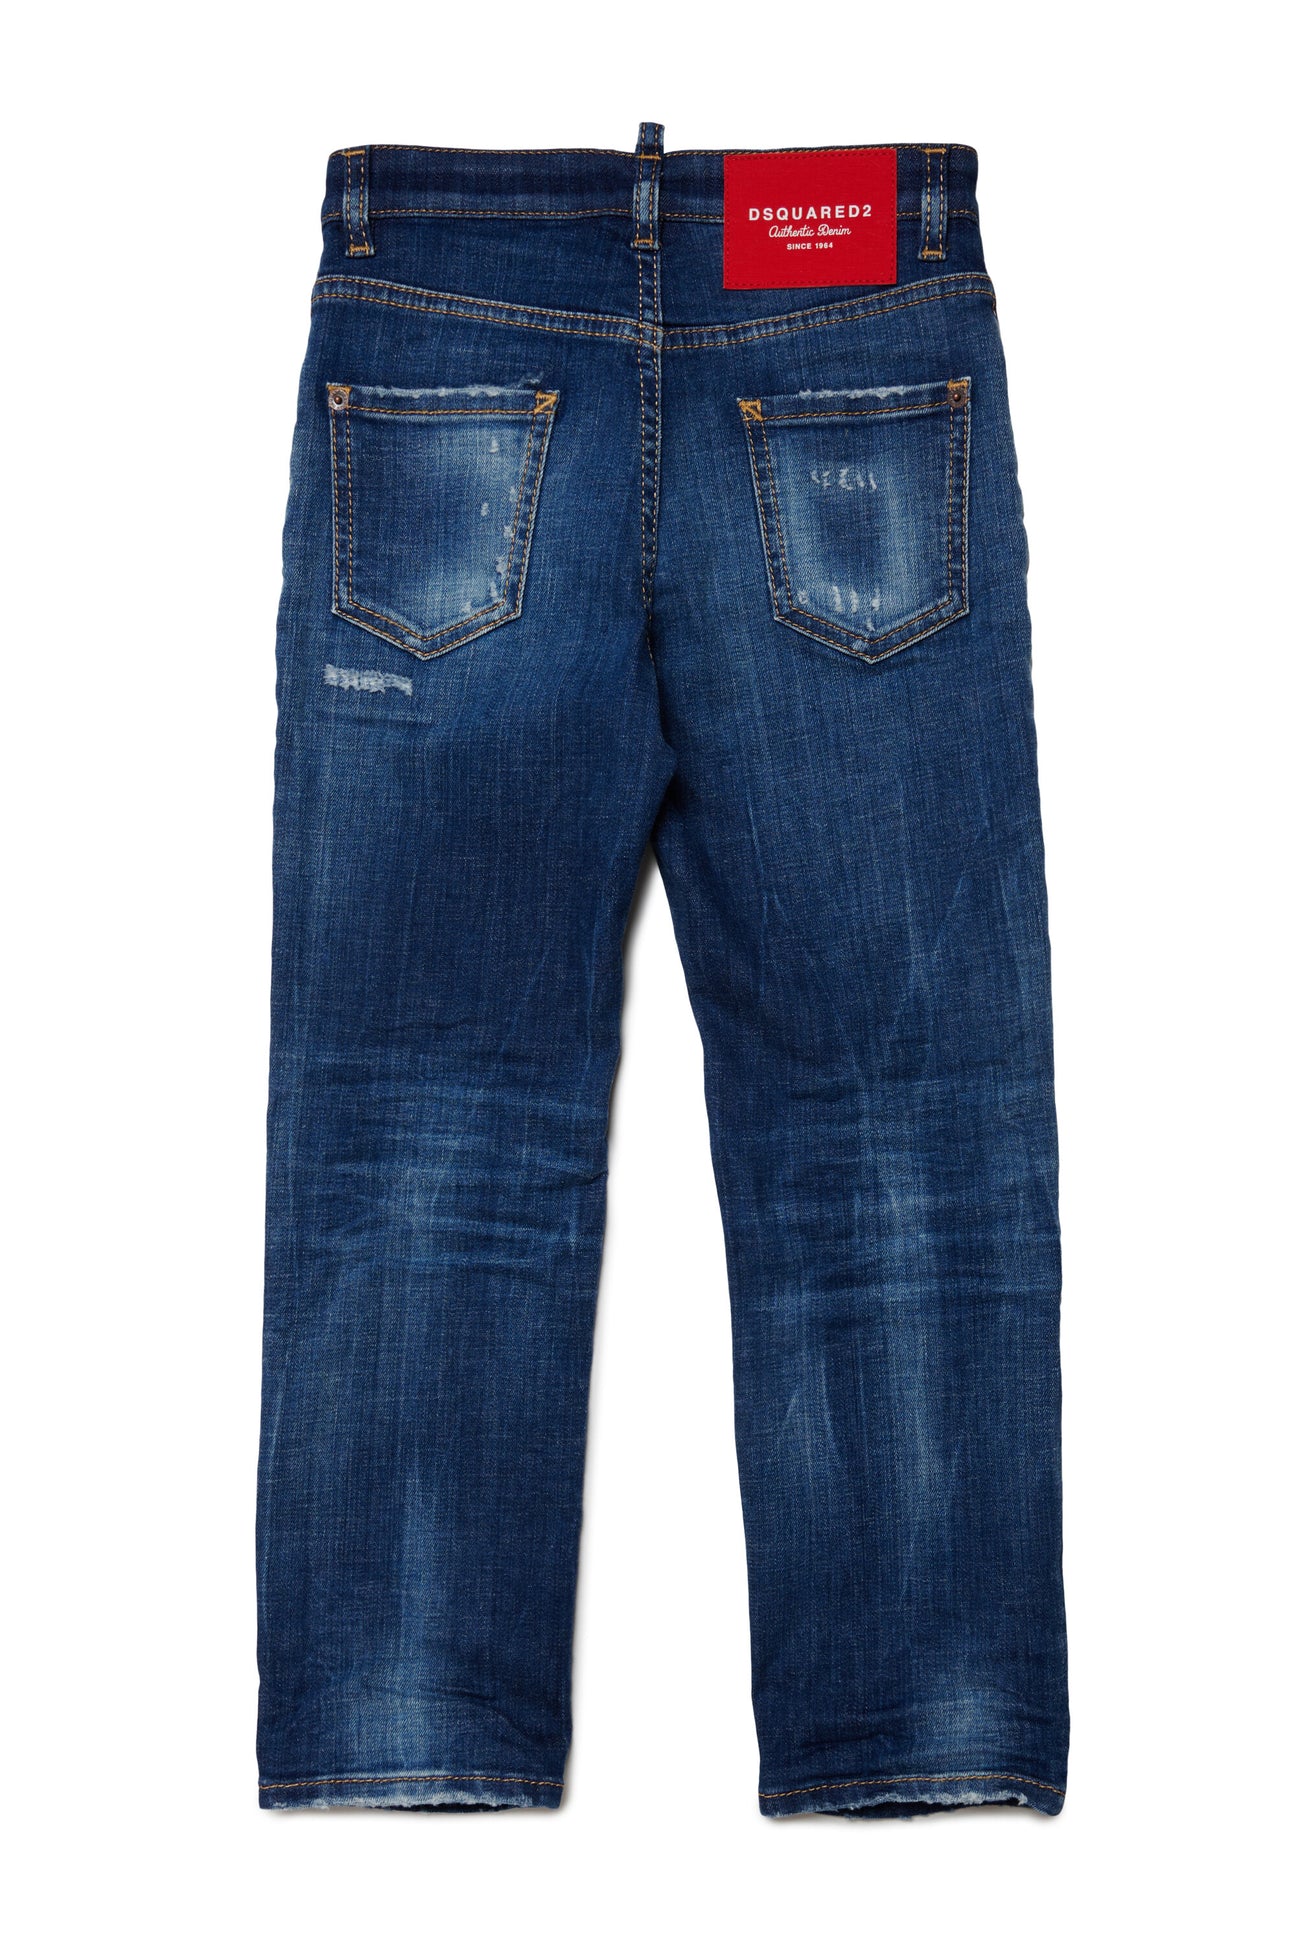 Shaded blue straight jeans with breaks - 642 Jean Shaded blue straight jeans with breaks - 642 Jean